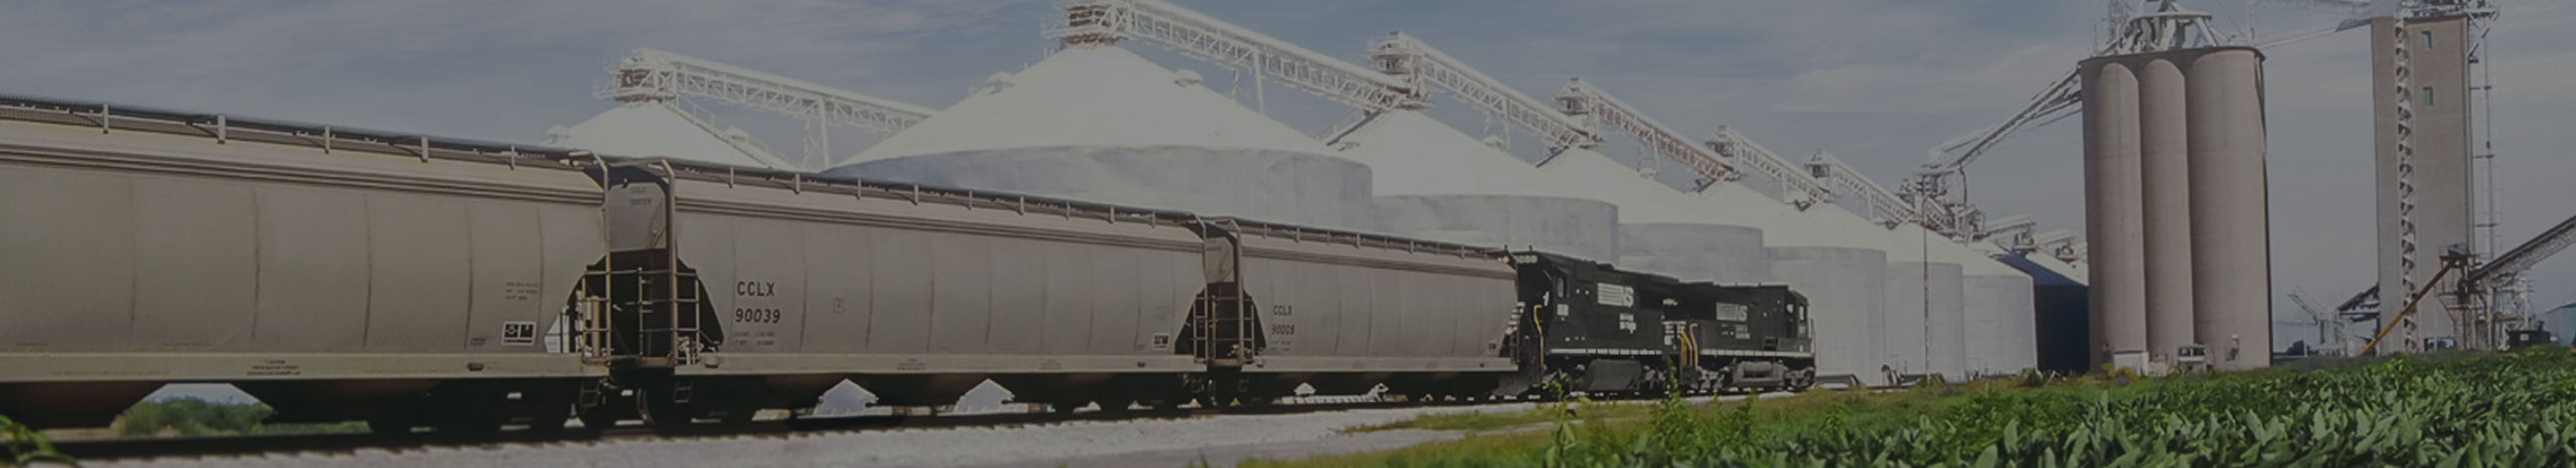 Norfolk Southern train and silos